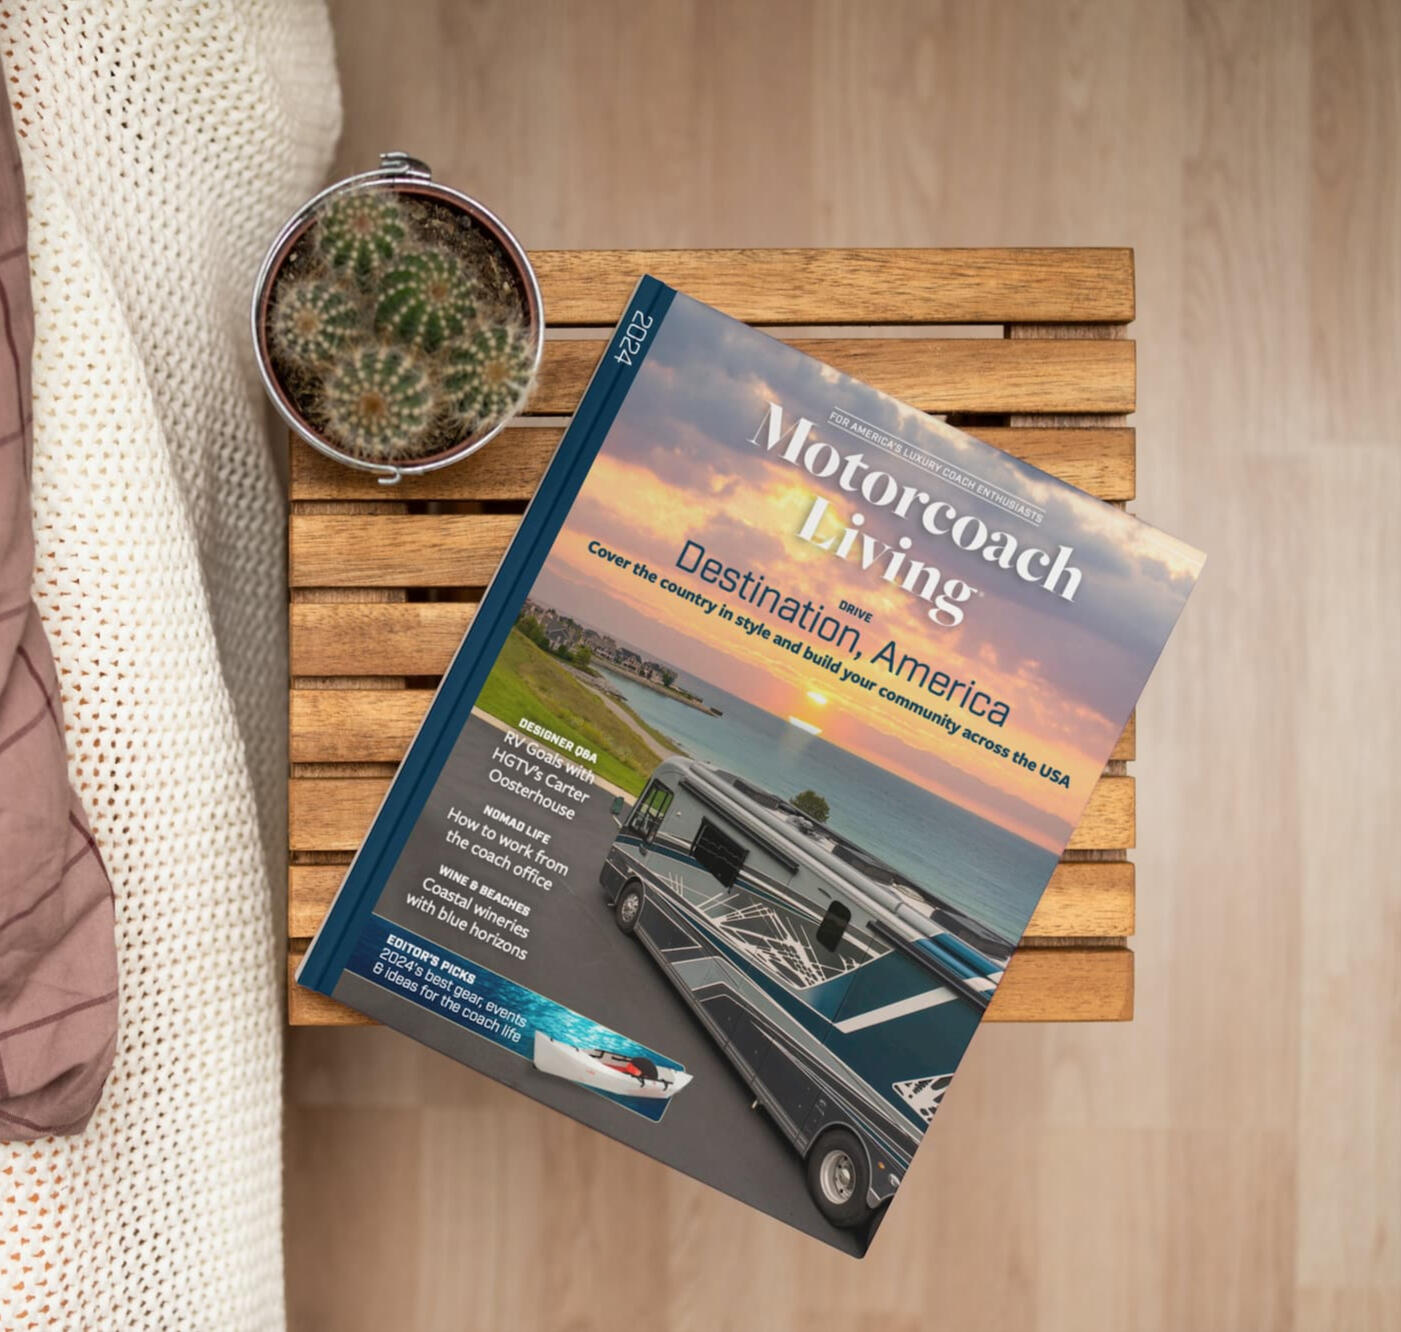 Motorcoach Living Magazine - Your Field Guide To Amazing Luxury Motorcoach Adventures